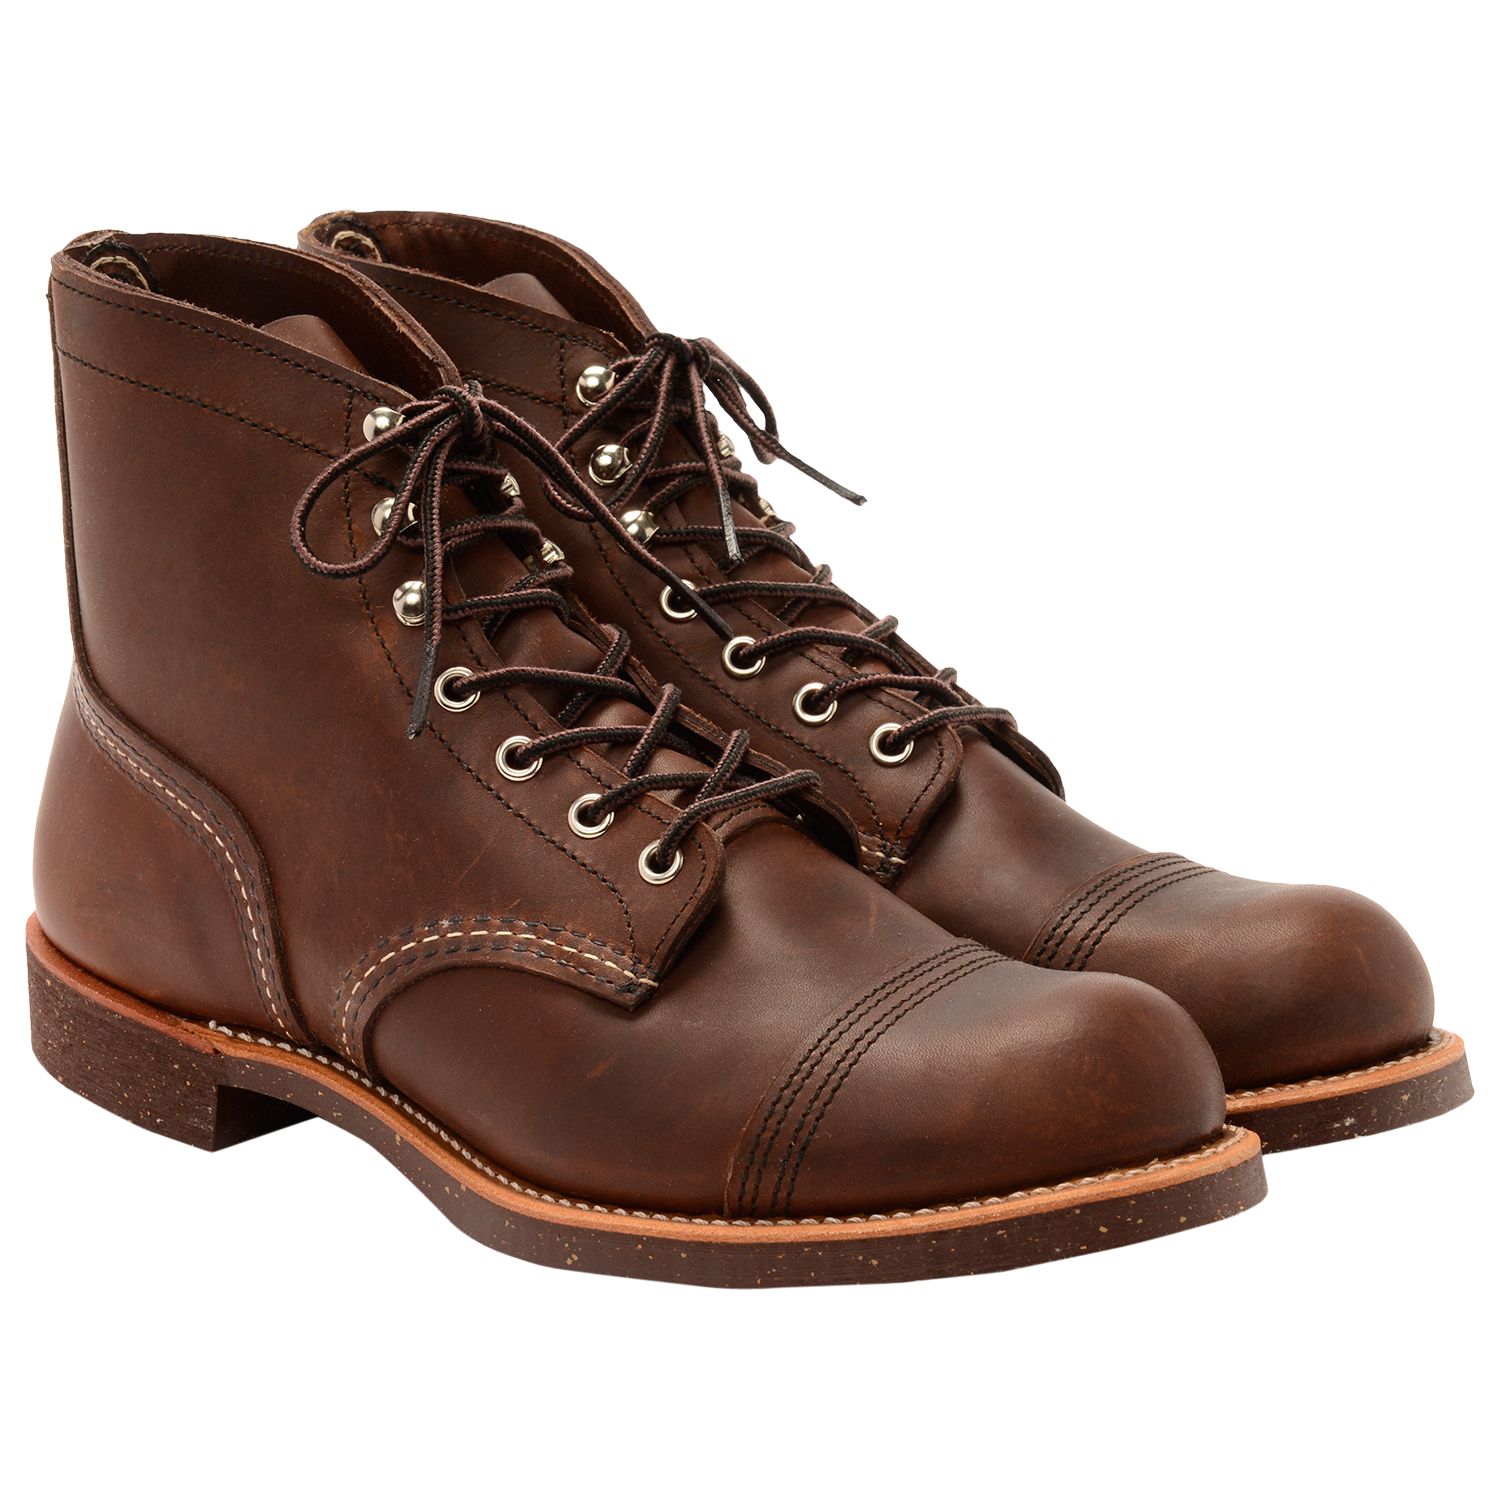 Red Wing 8111 Iron Ranger Boots Amber Harness At John Lewis Partners